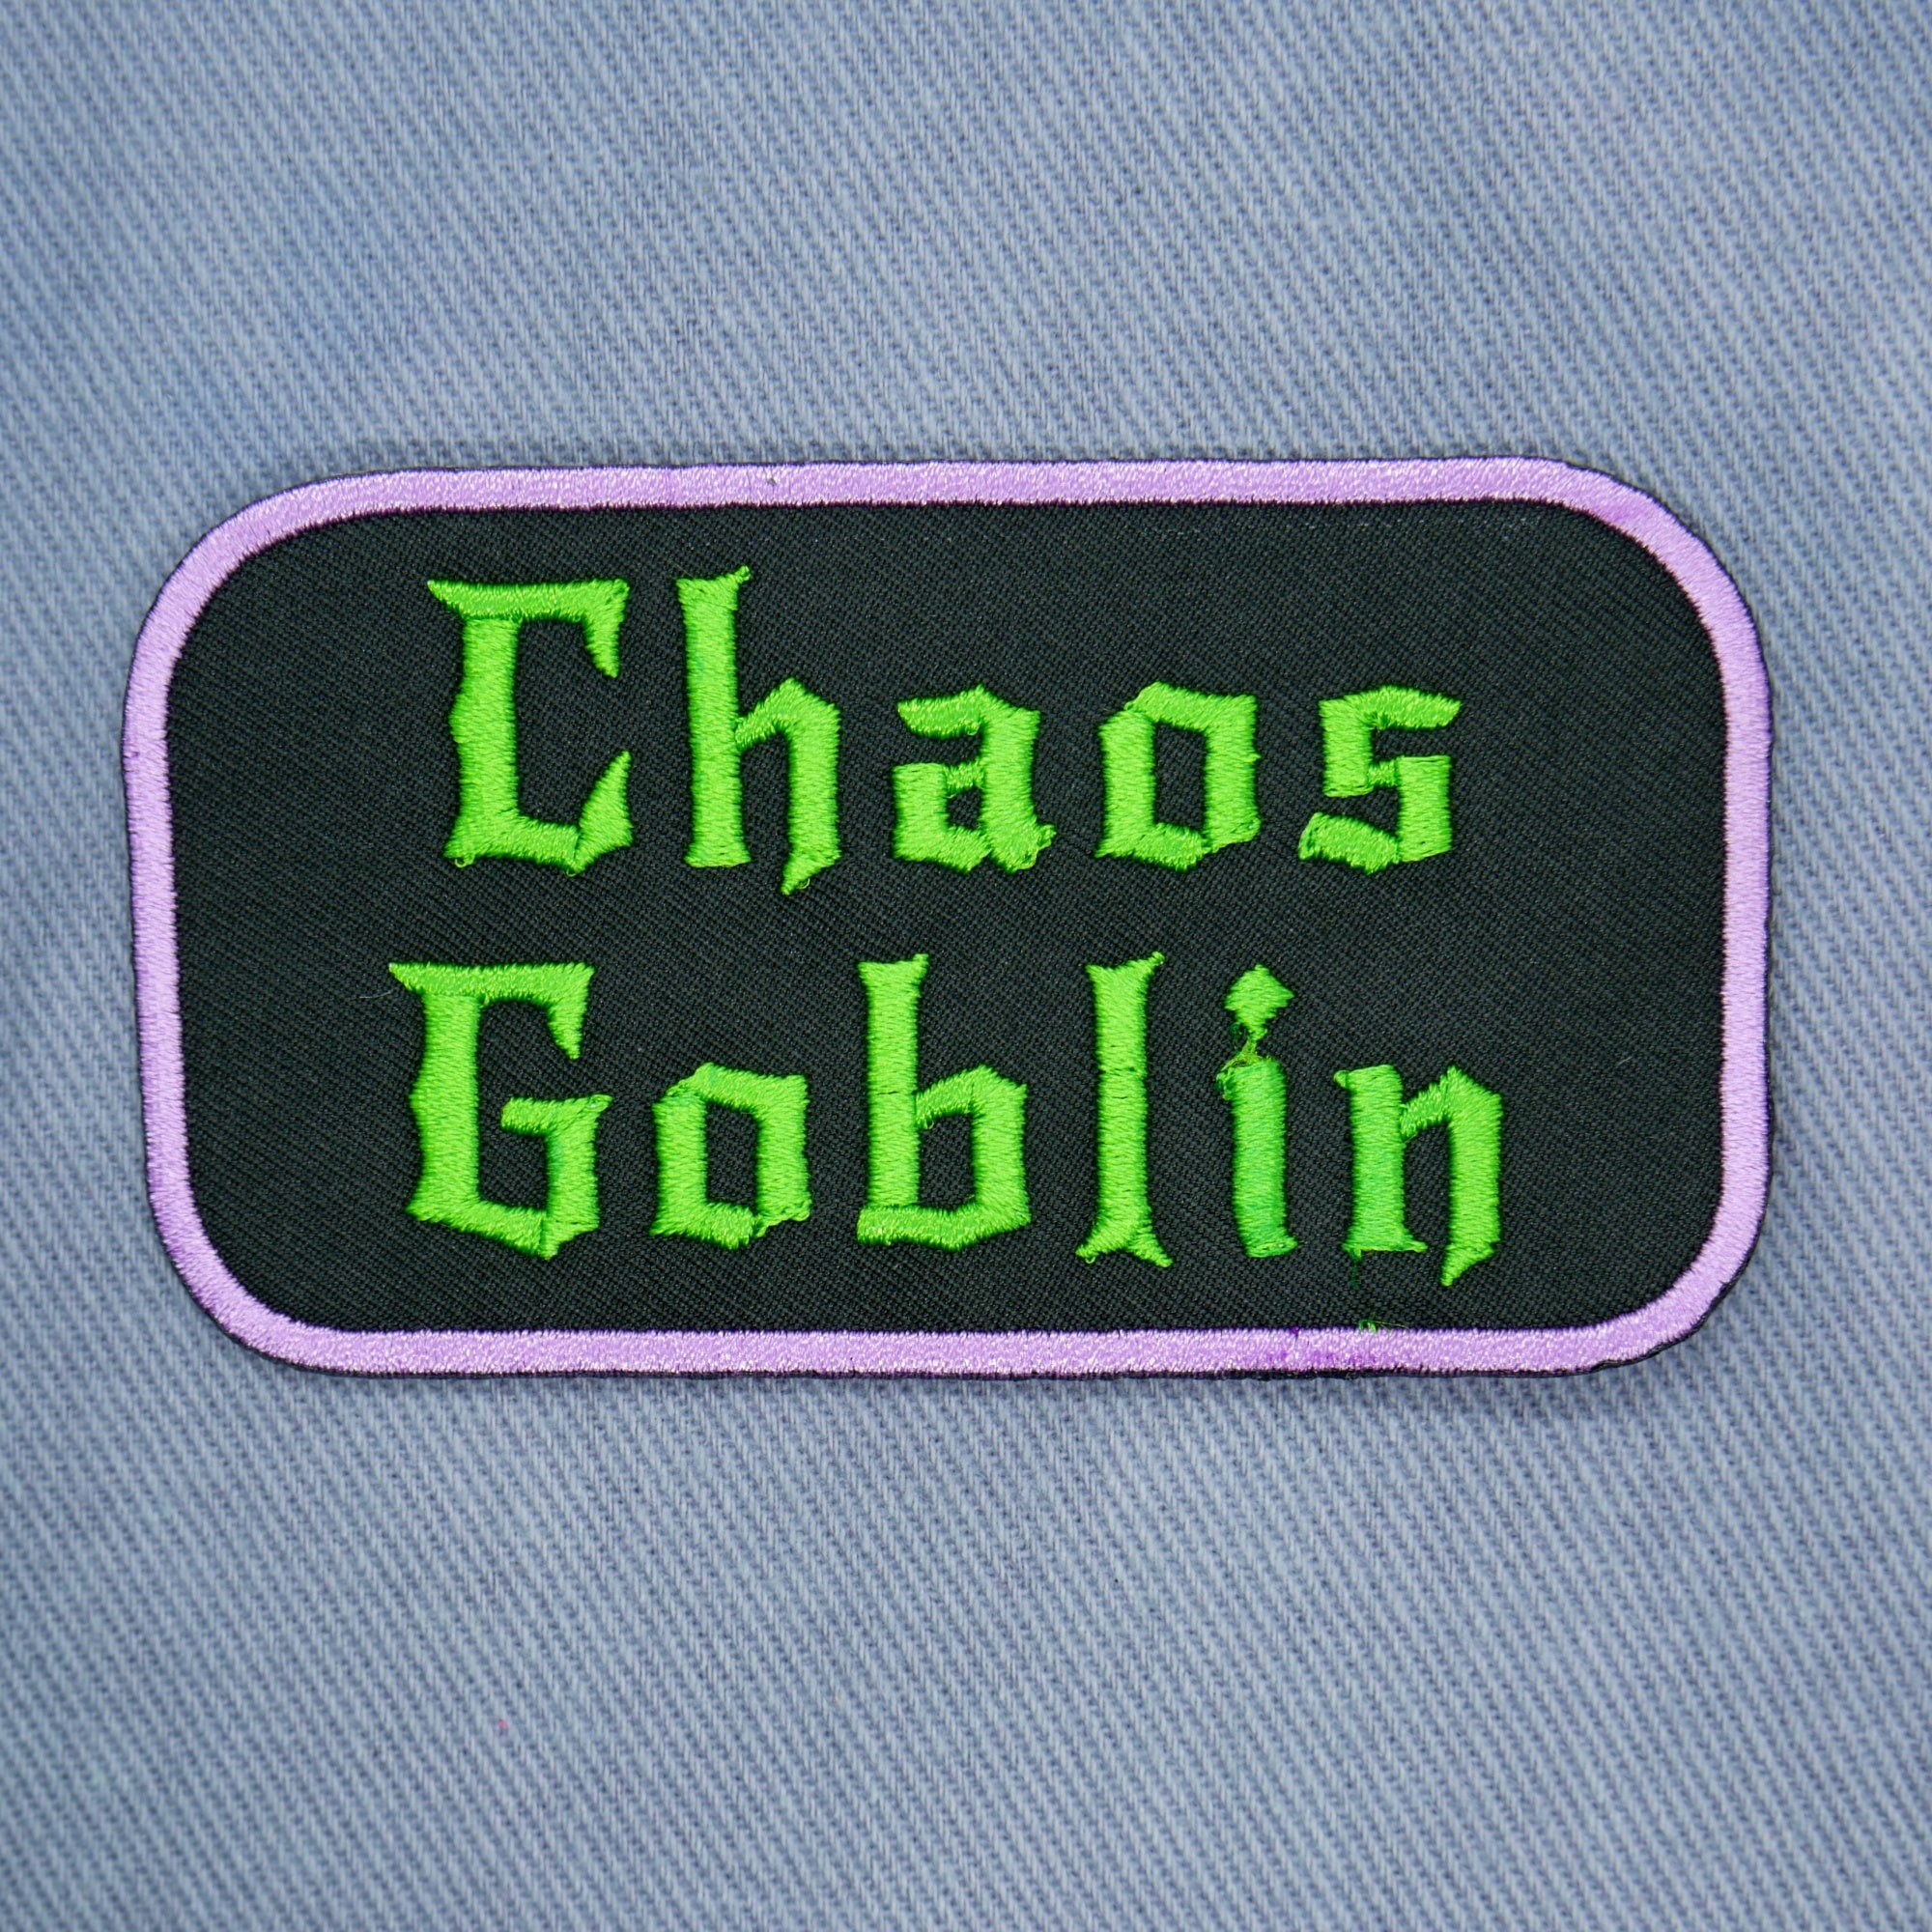 Chaos Goblin Name Tag Patch